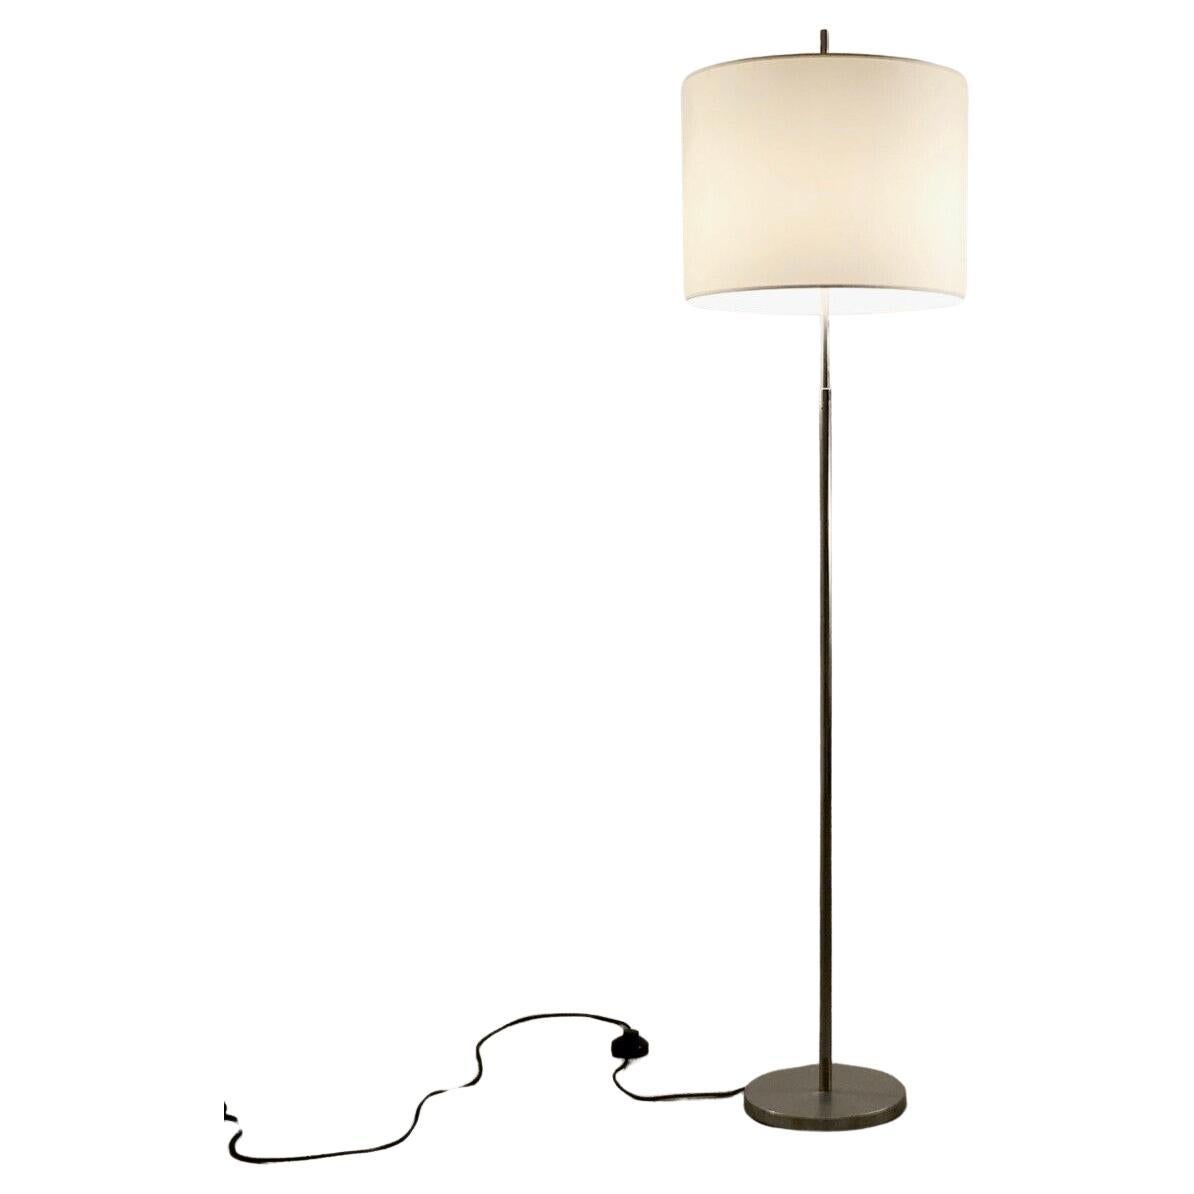 A MINIMAL MODERNIST Telescopic FLOOR LAMP by OSTUNI & FORTI, O-LUCE, Italy 1970 For Sale